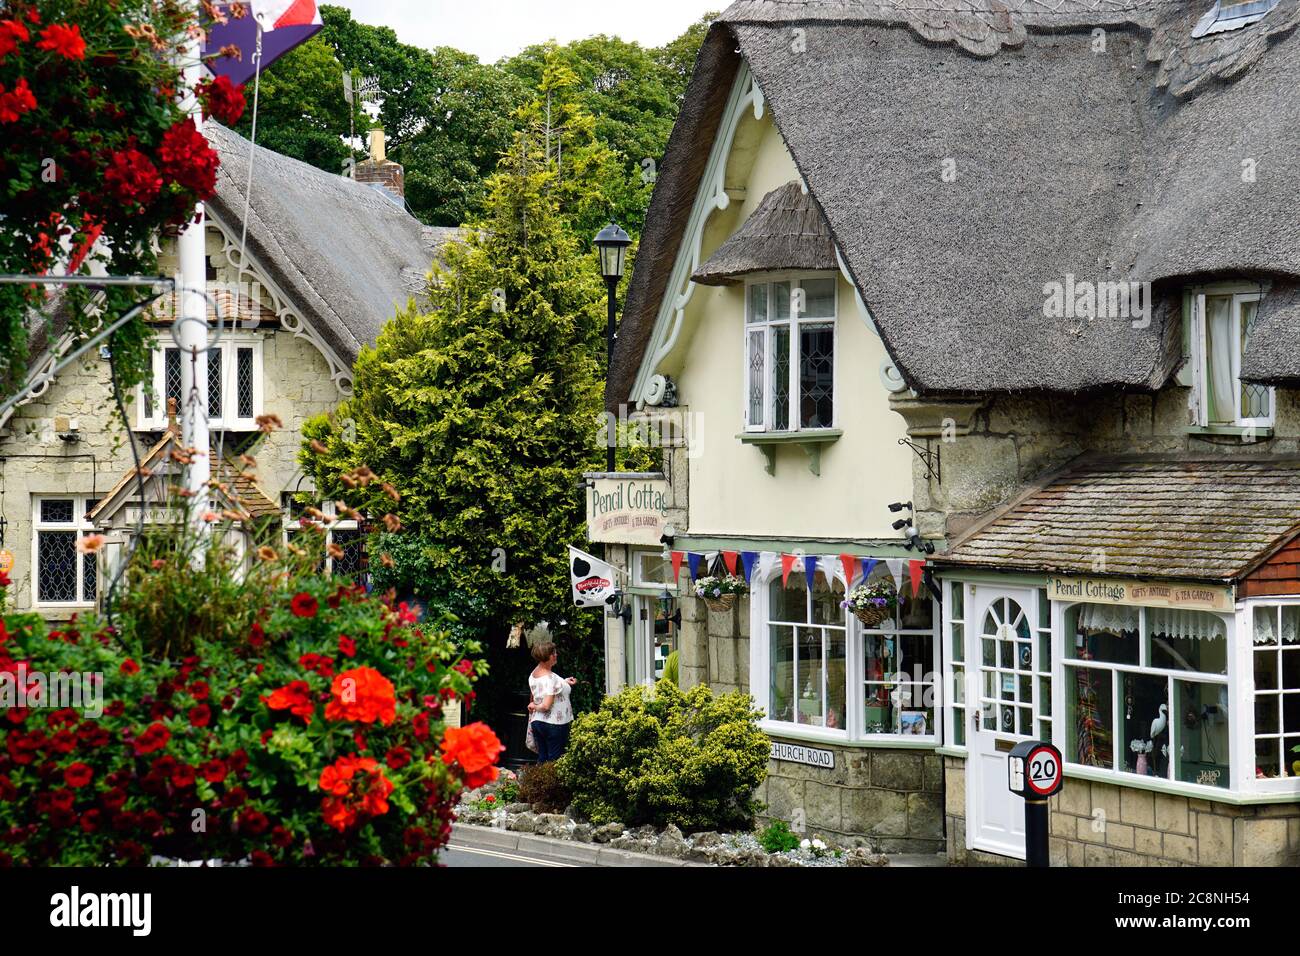 Shanklin, Isle of Wight, UK. July 14, 2020.  Tourst queue under coronavirus rule to enter Pencil cottage in the beautiful thatched village of Shanklin. Stock Photo